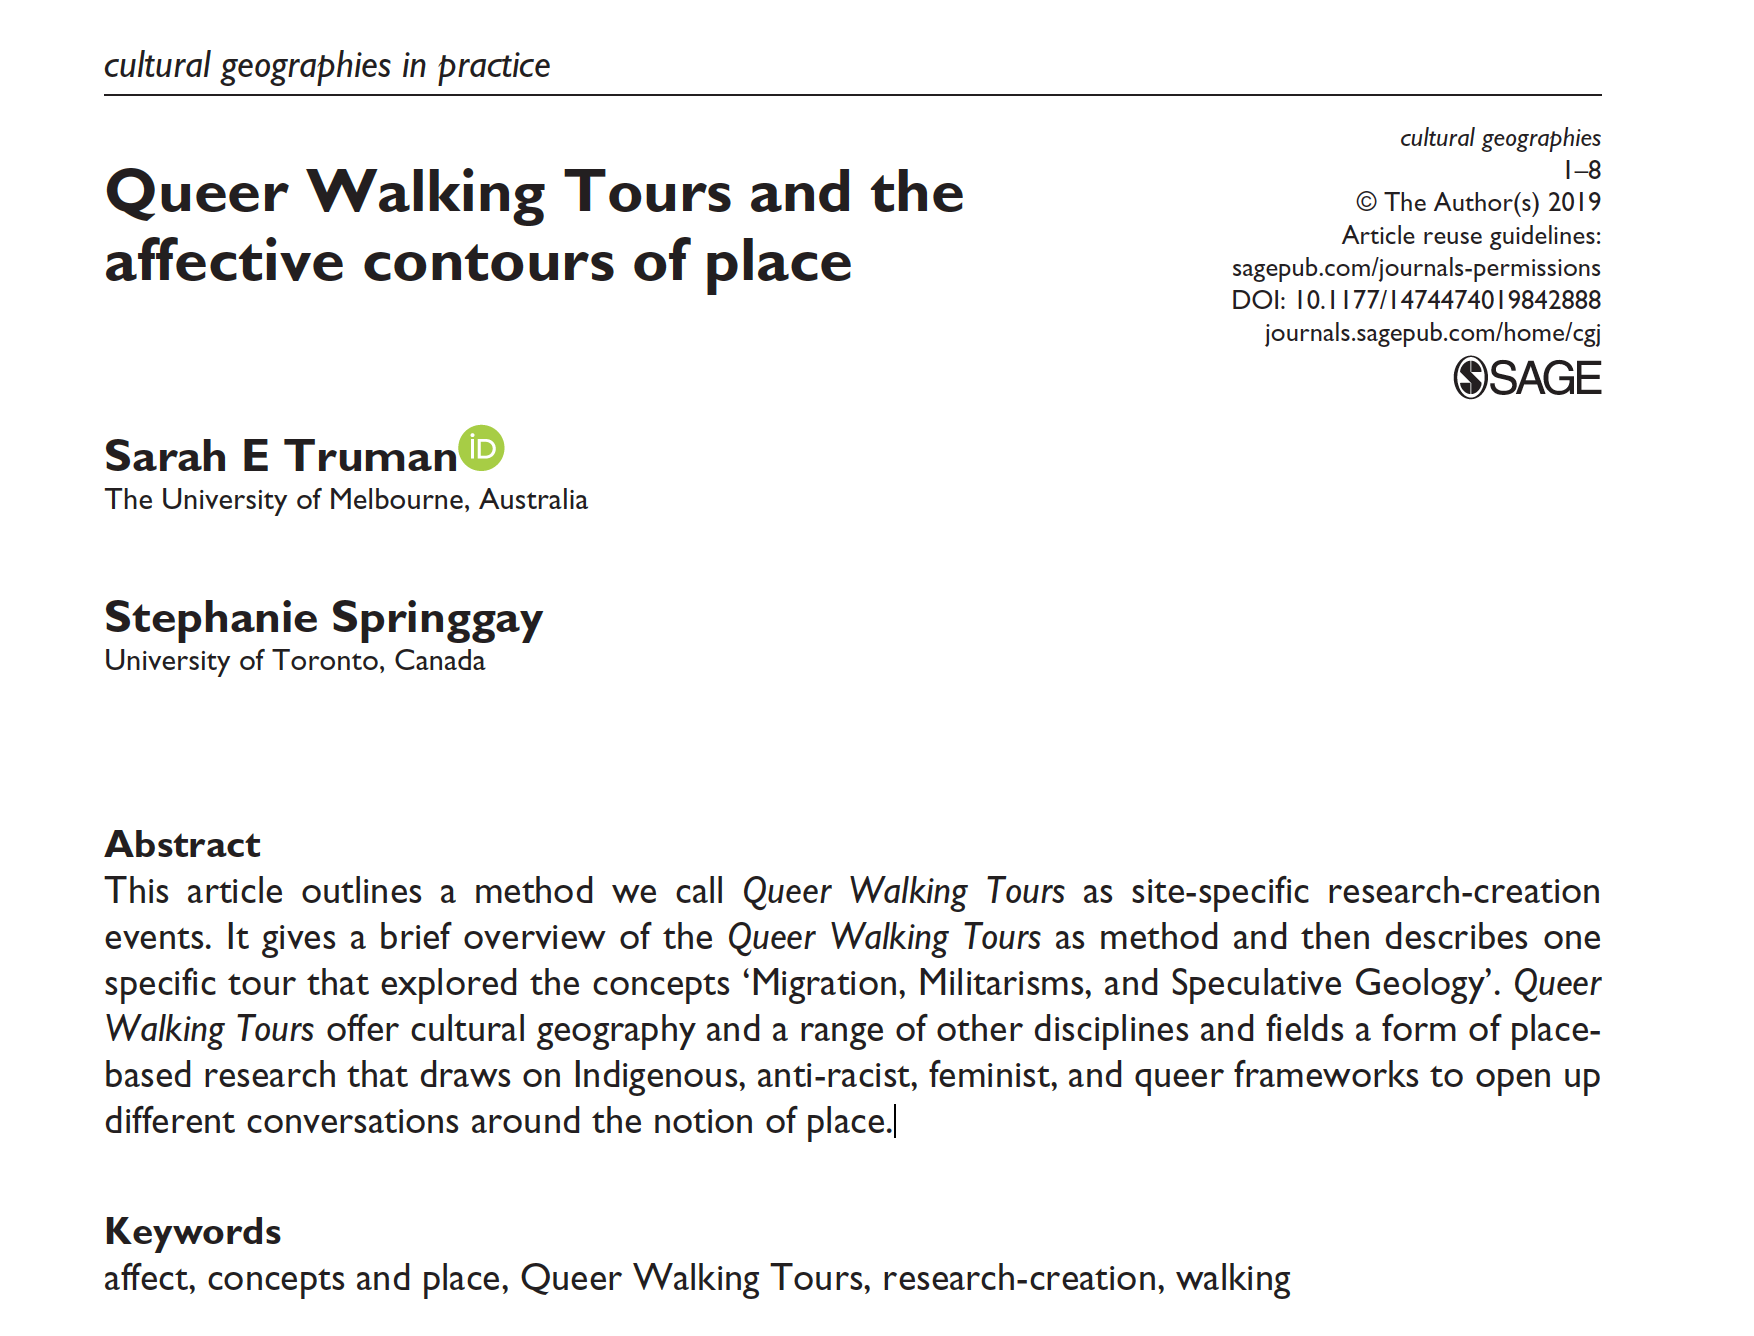 Queer Walking Tours and the affective contours of place